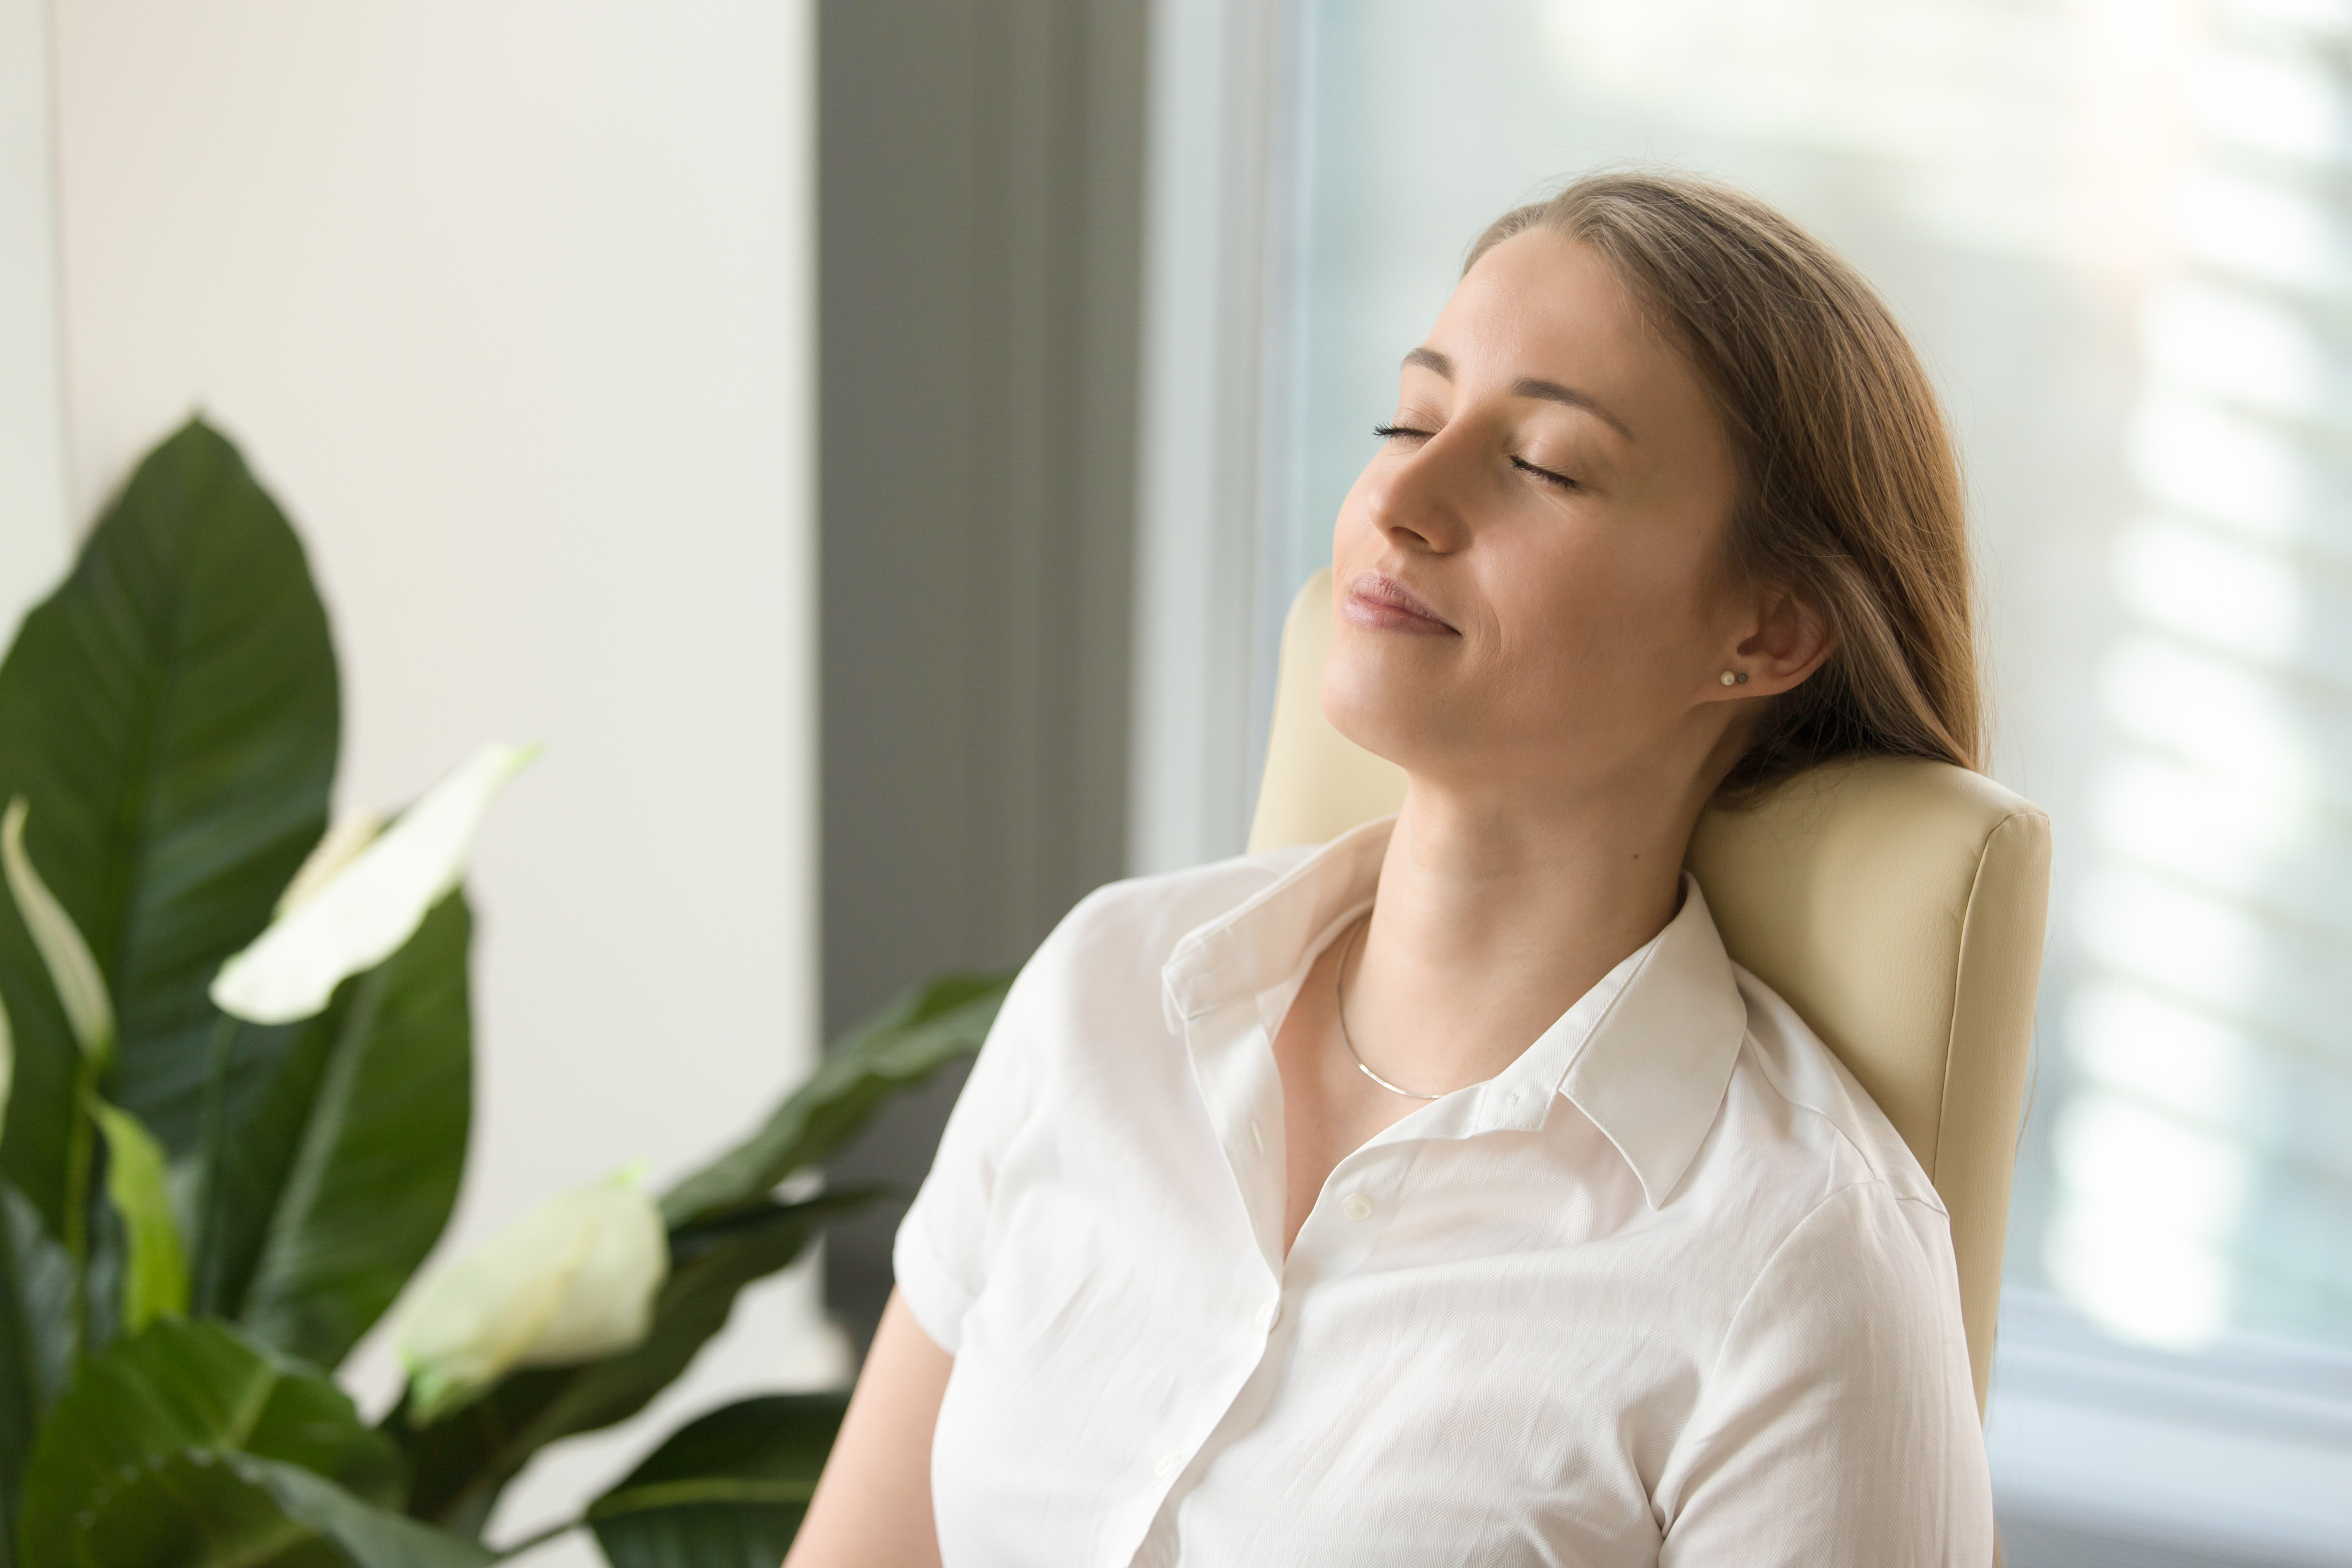 5 Biggest Benefits of Power Napping For Your Brain